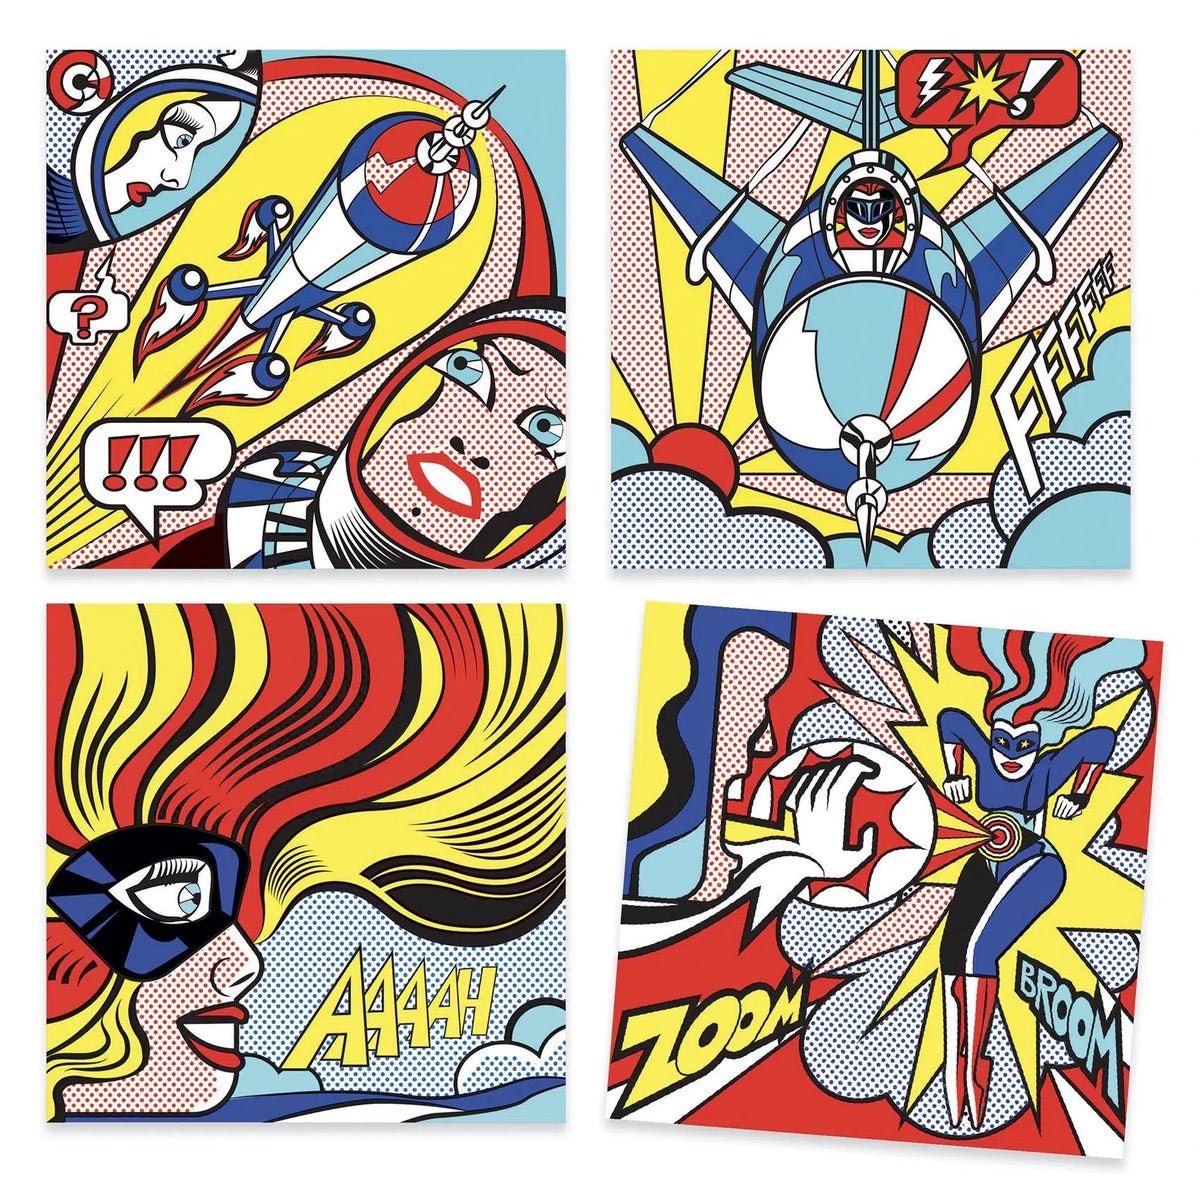 Front view of the 4 illustrations included in the Superheroes Inspired by Lichtenstein Coloring and Rub-On Transfer Kit.